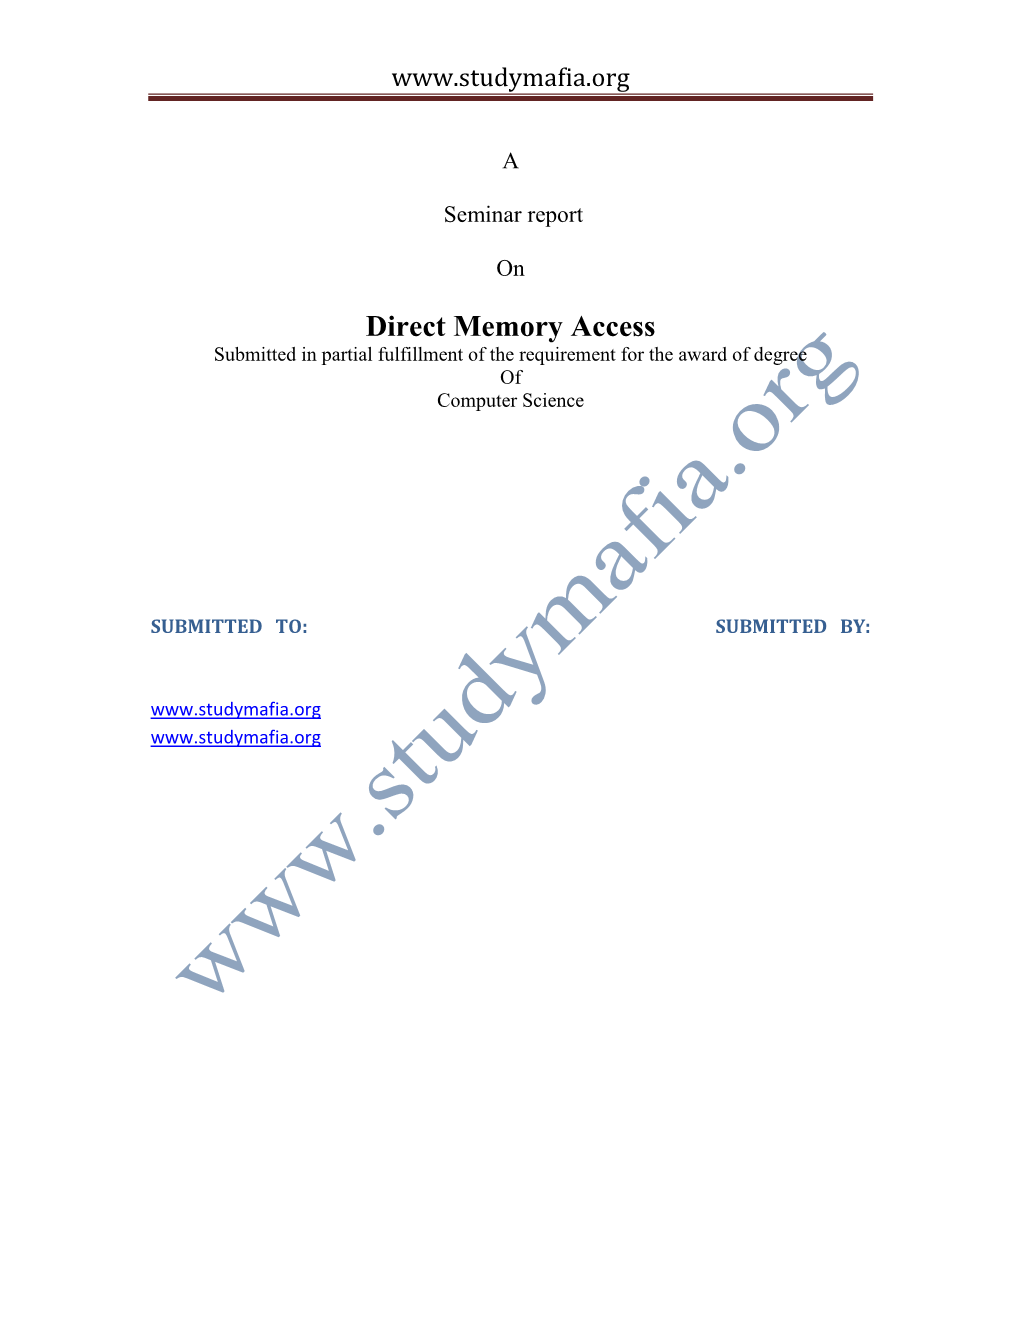 Direct Memory Access Submitted in Partial Fulfillment of the Requirement for the Award of Degree of Computer Science